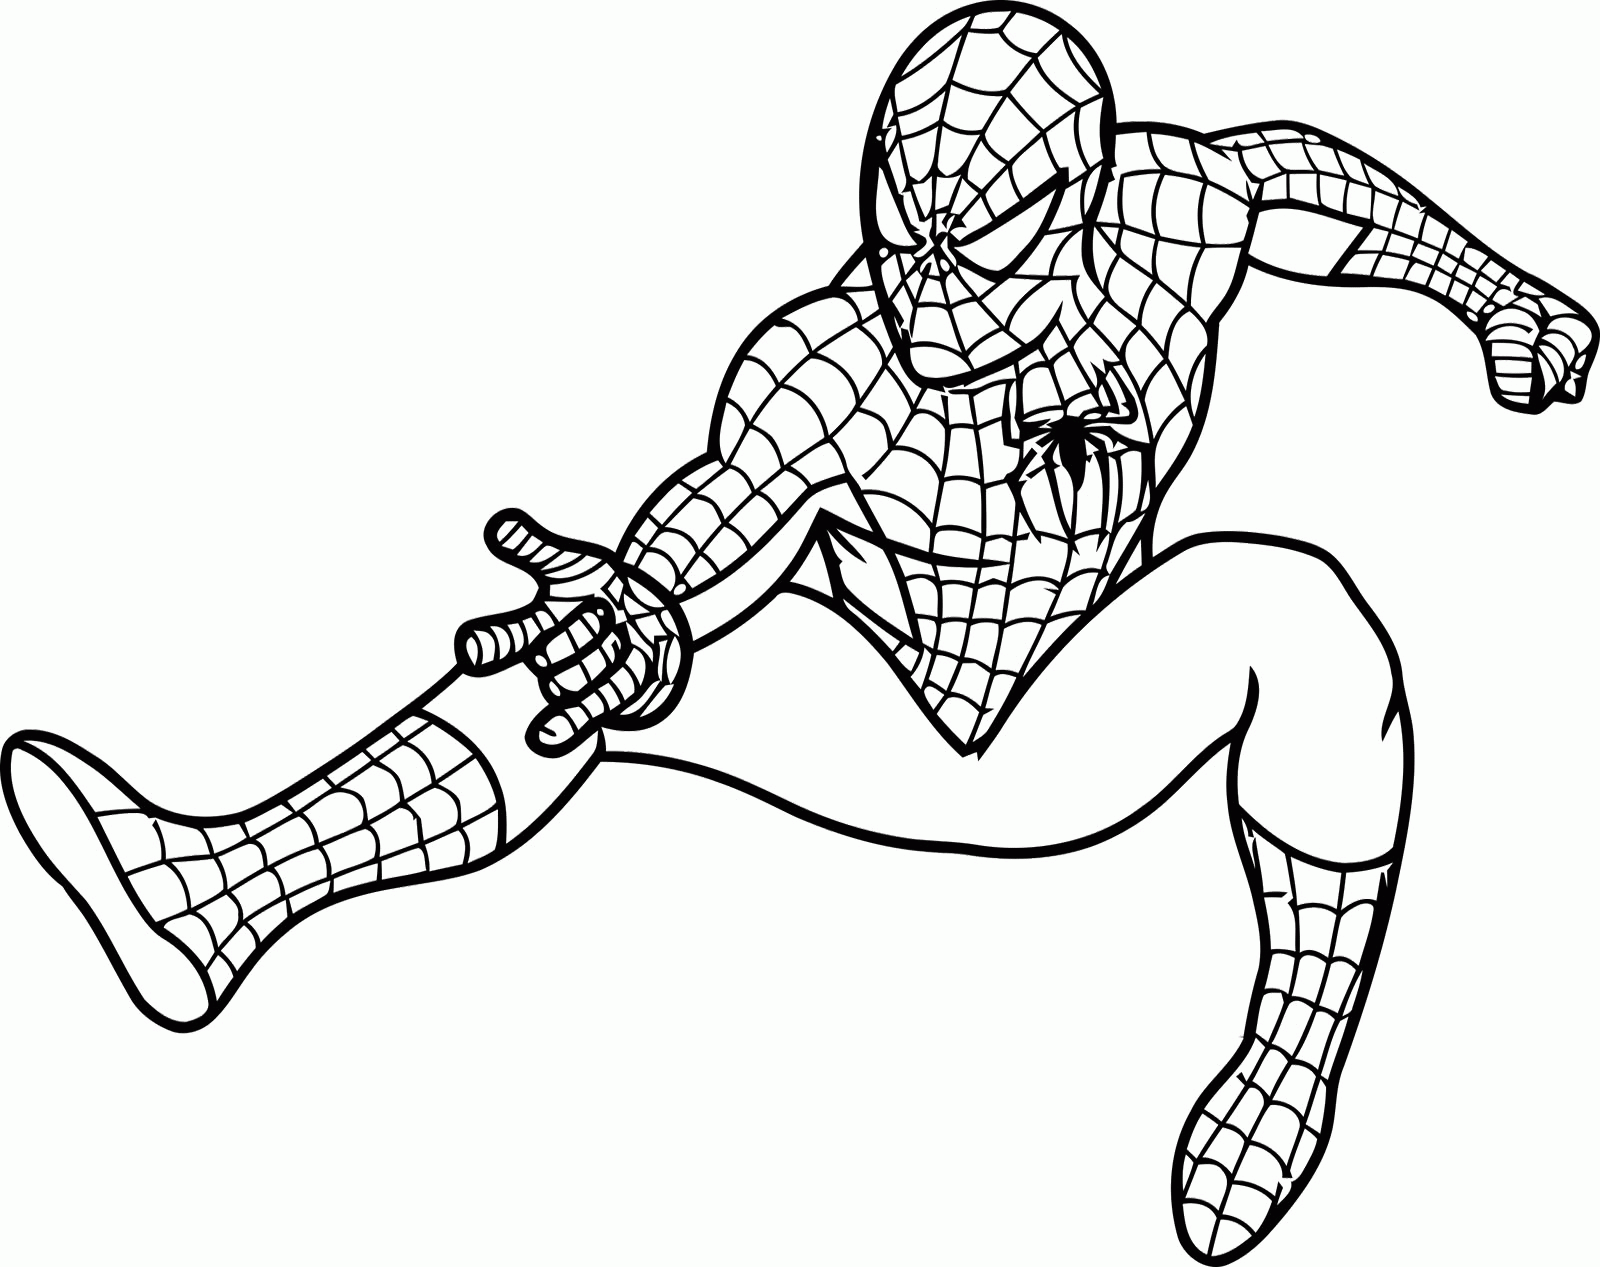 Ultimate Spiderman Coloring Page